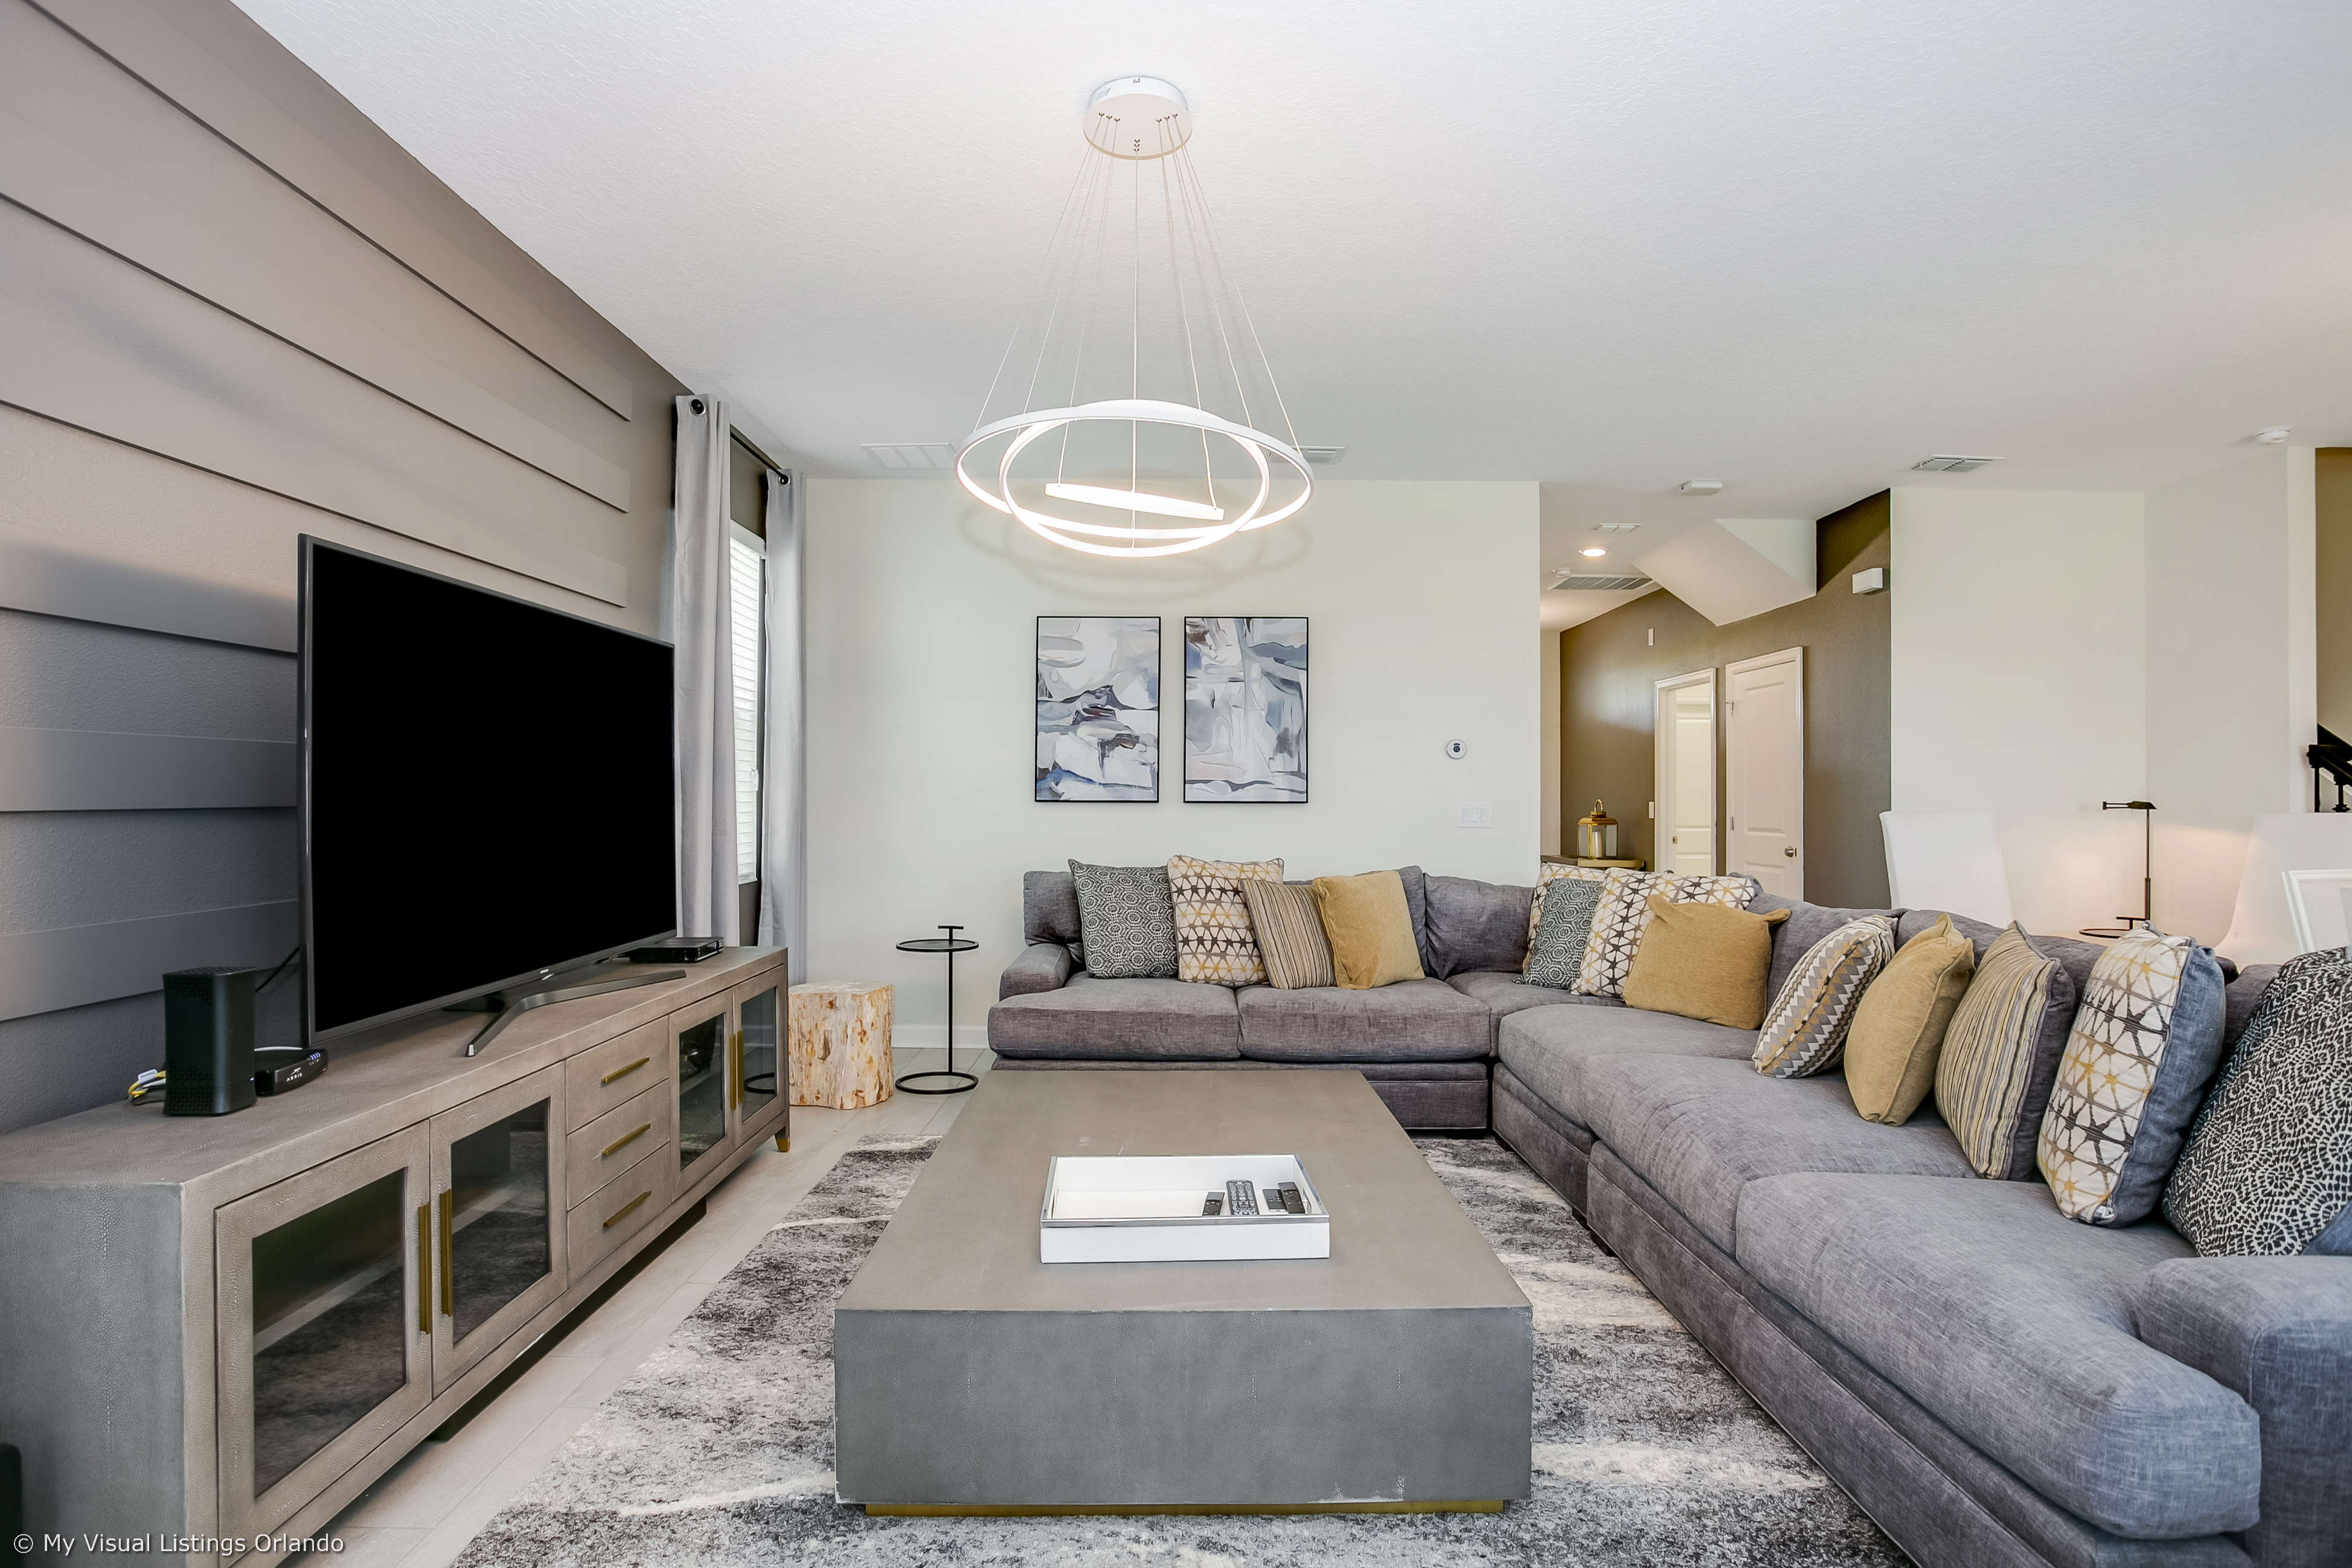 - Lush Living Area of the Home in Florida - Comfy sofa creates a warm and inviting space for relaxation and entertainment  - Smart TV and Netflix - Luxurious decor and lighting for a lavish ambiance